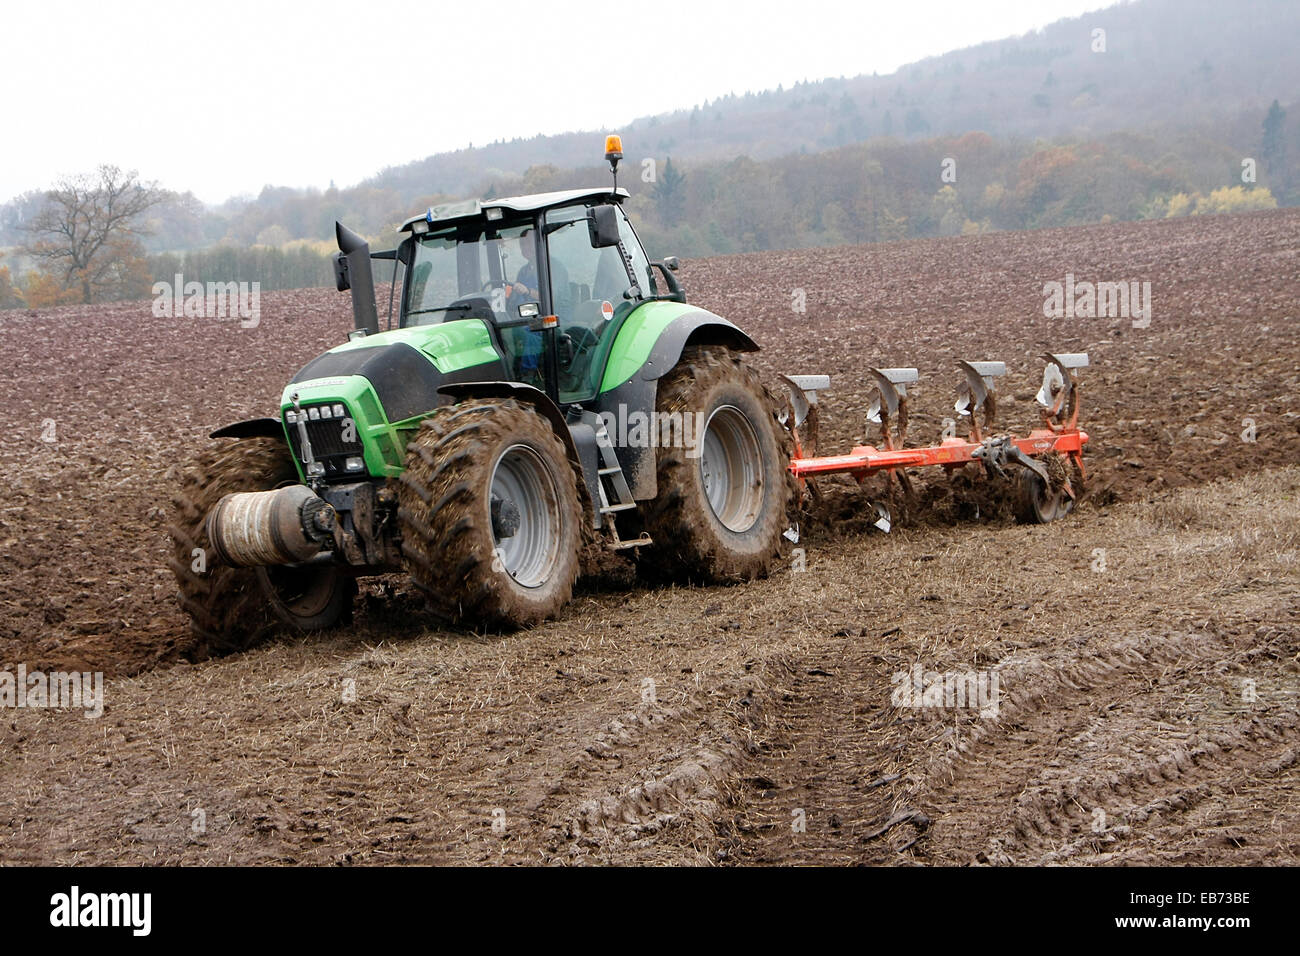 Plowing a field in Reichenhausen in the Biosphere Reserve of rhoen. Processing of agricultural land takes place in this environment in terms of conservation and sustainability. Photo: Klaus Nowottnick Date: 11/04/2014 Stock Photo